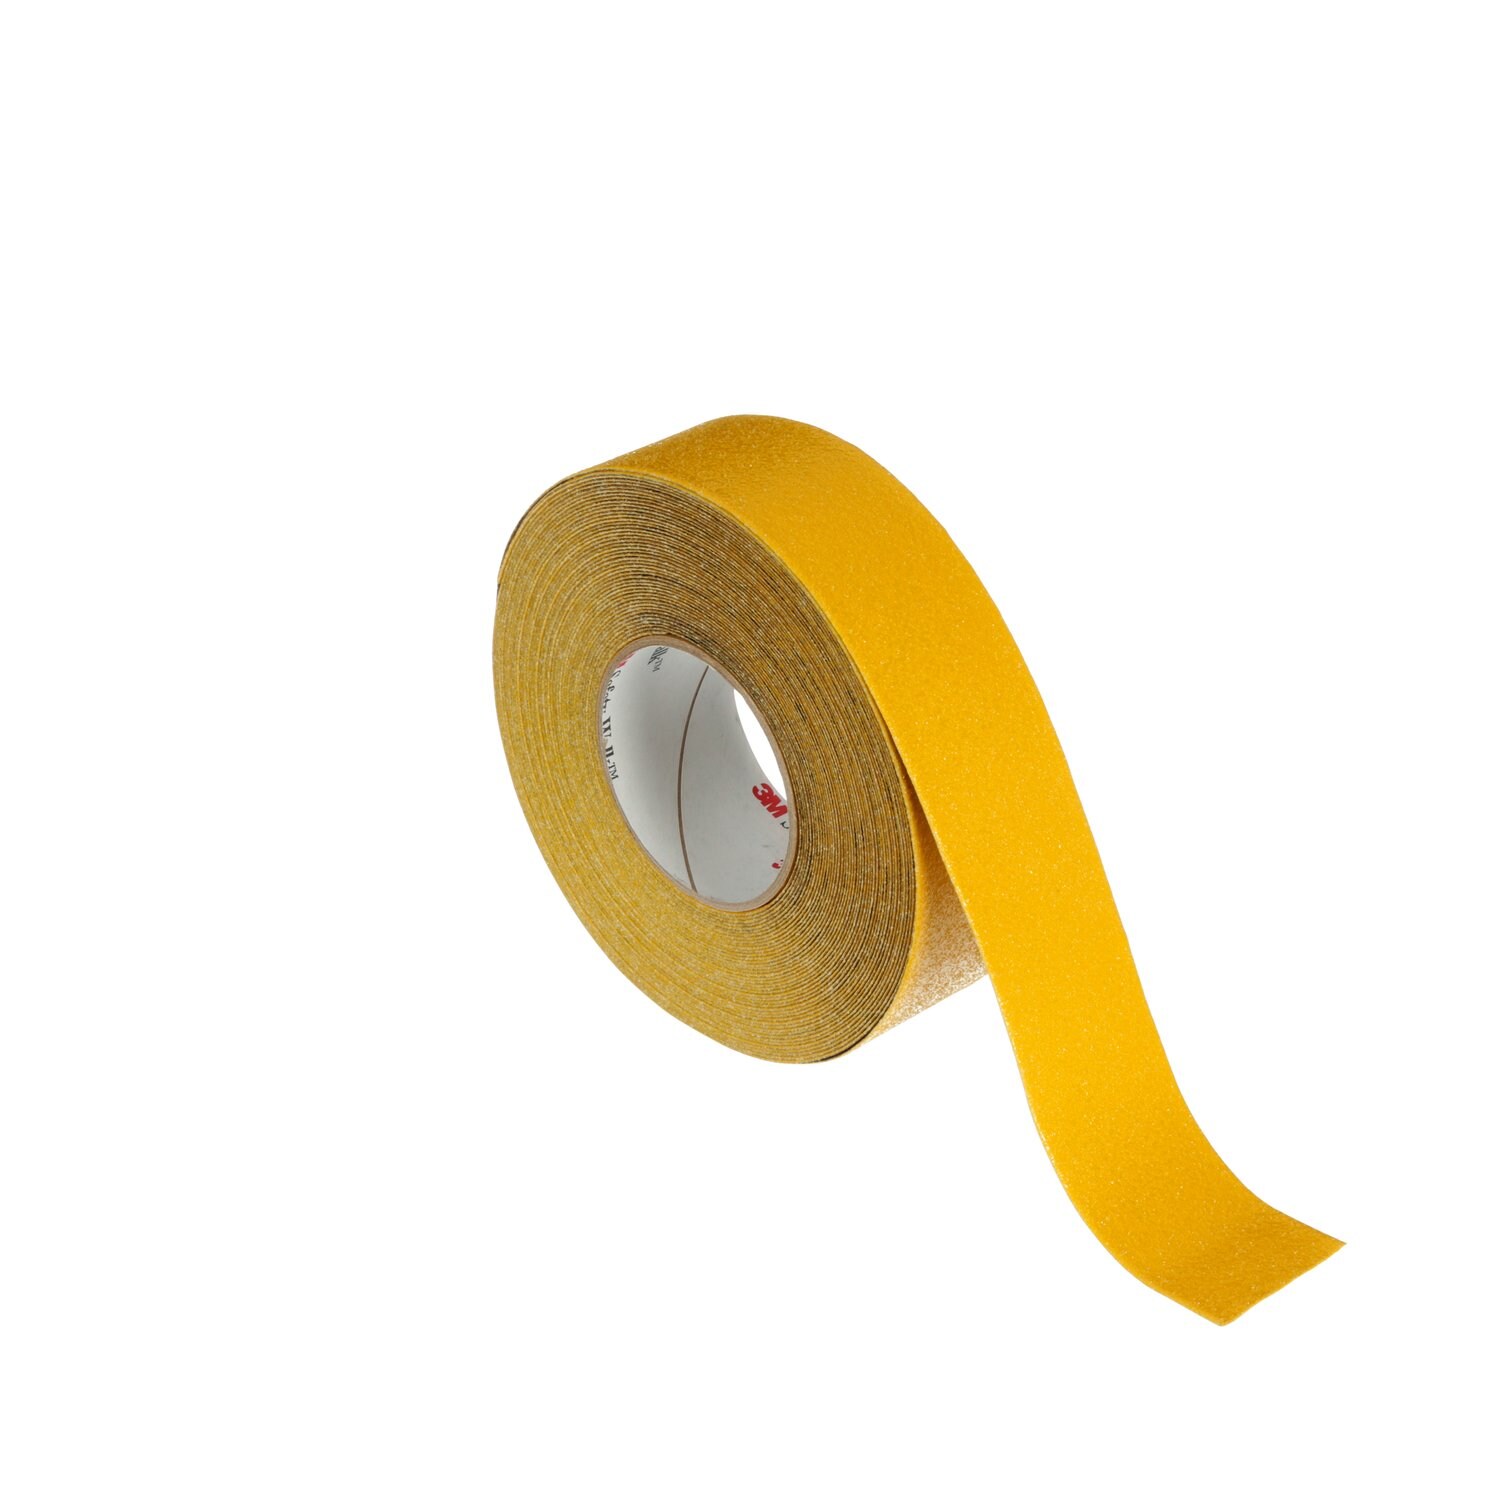 7100000611 - 3M Safety-Walk Slip-Resistant Conformable Tapes & Treads 530, Safety Yellow, 2 in x 60 ft, 2 Roll/Case